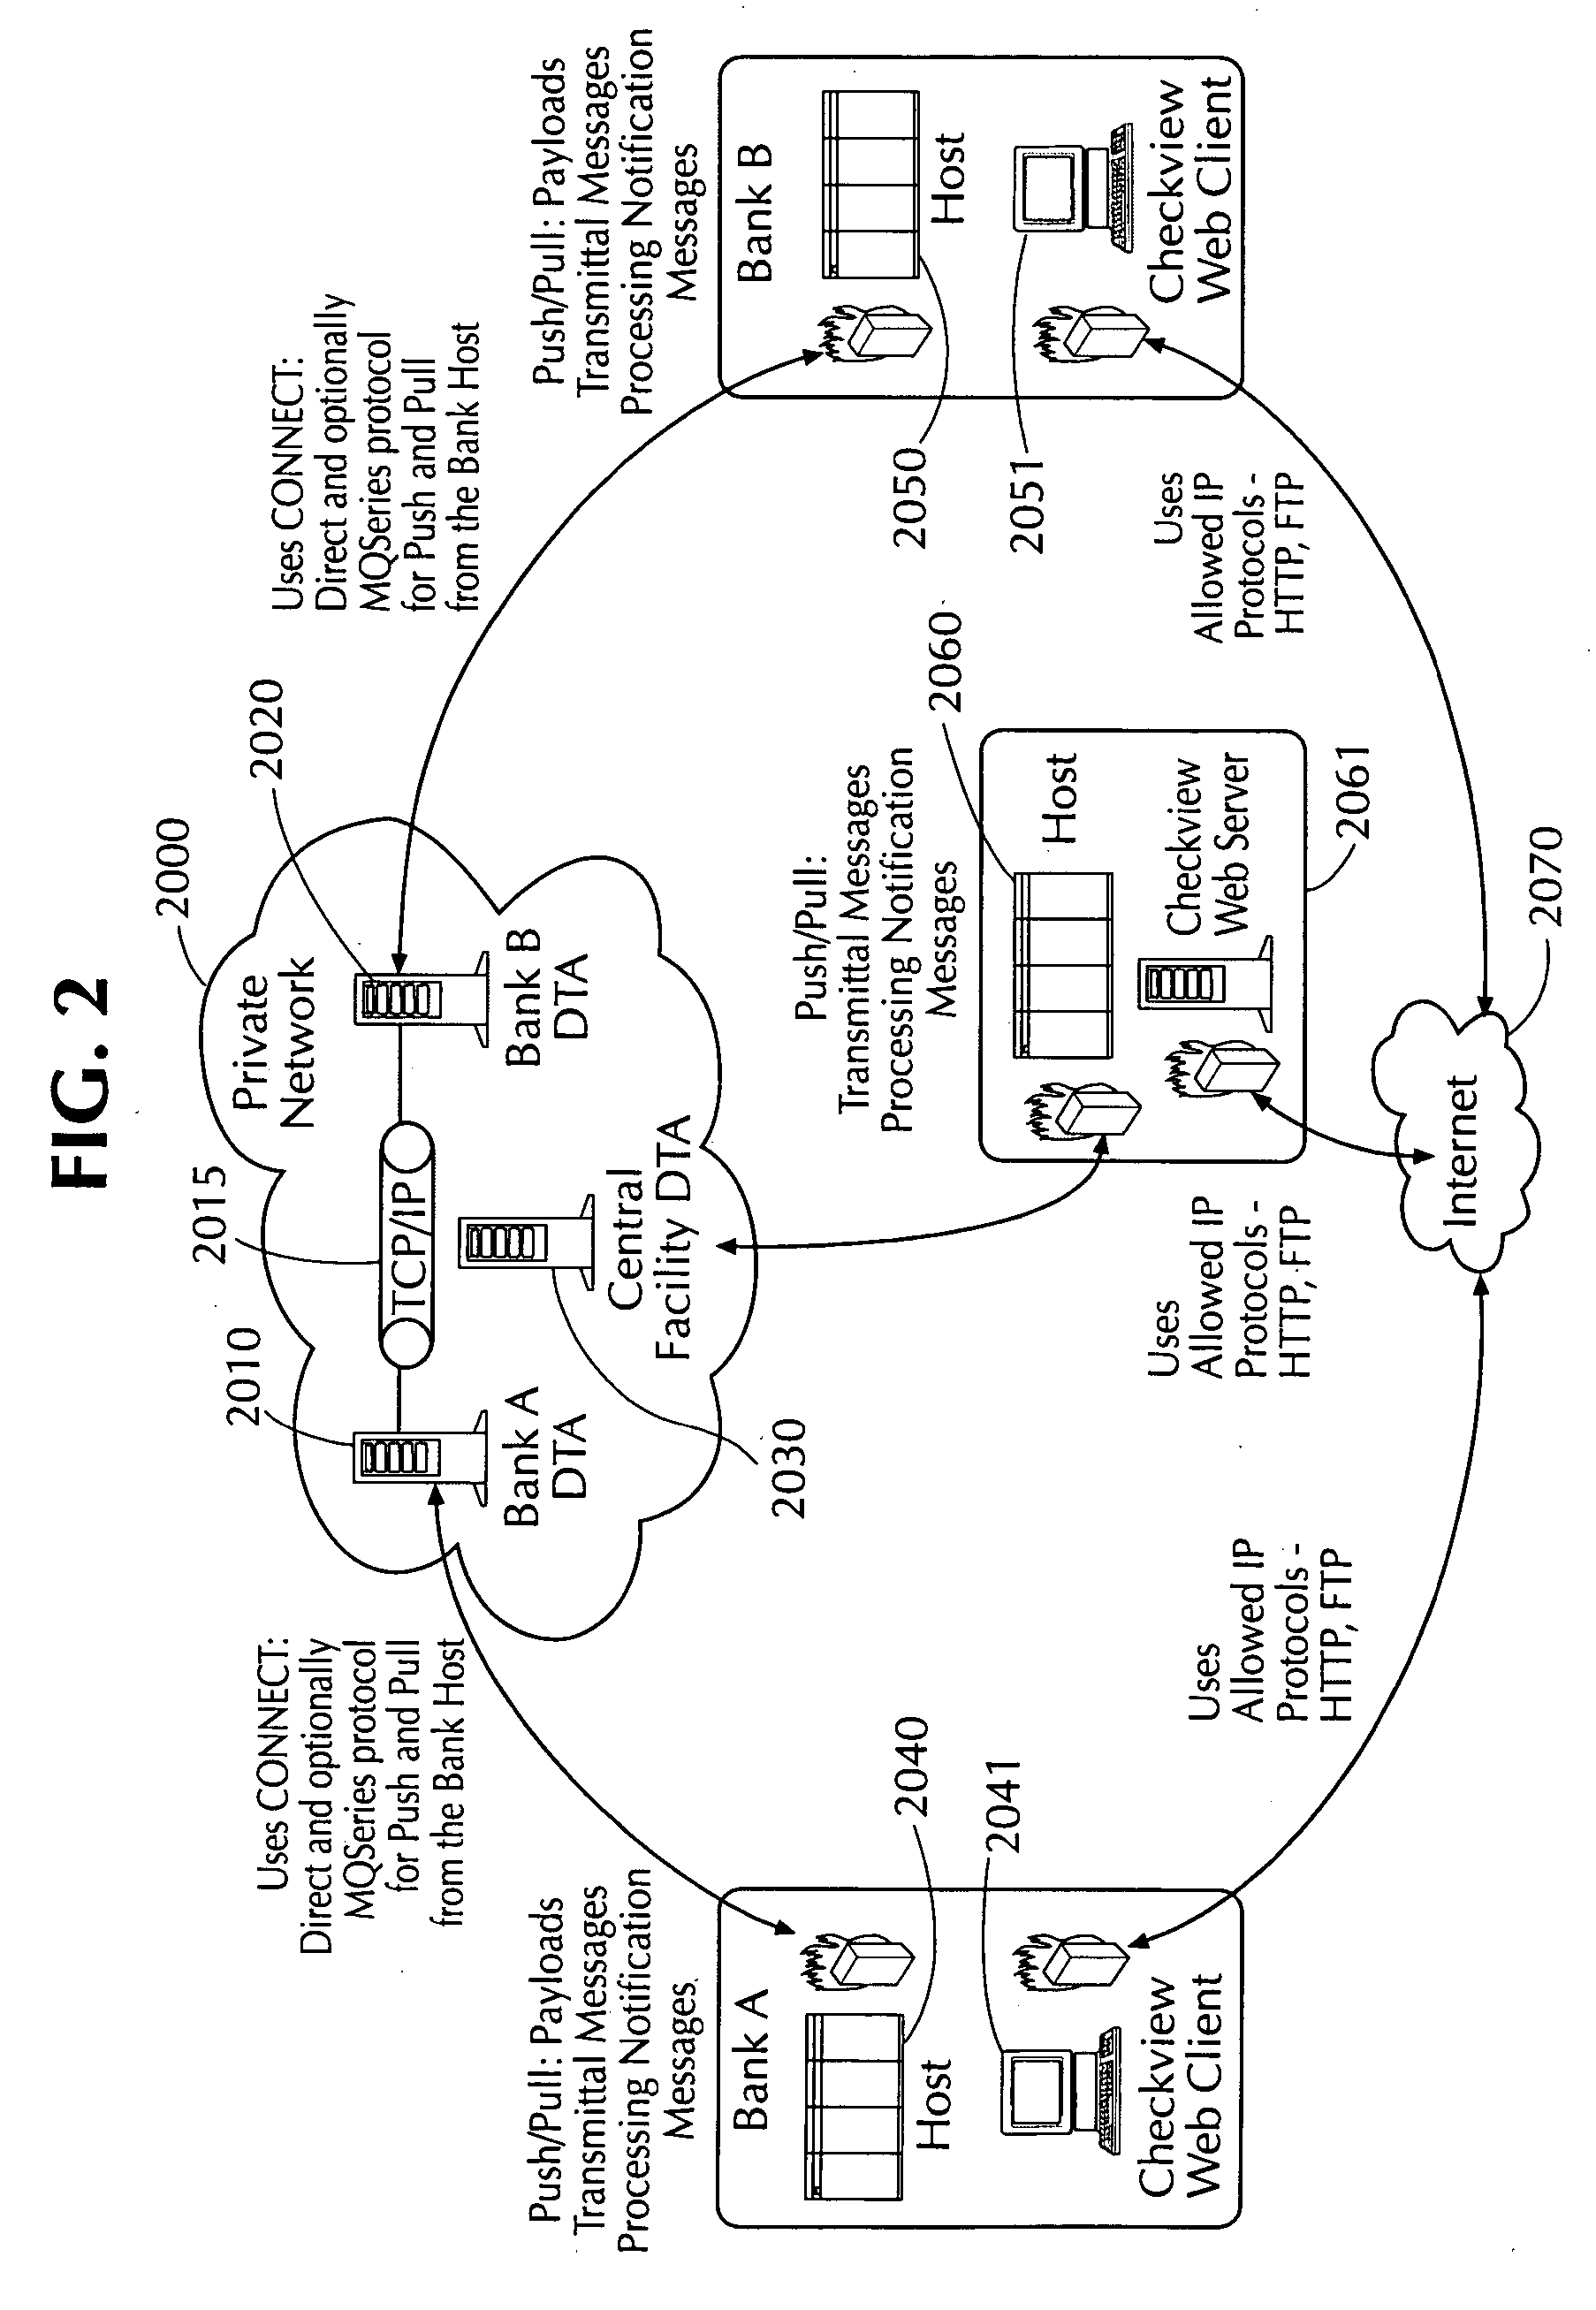 Electronic payment clearing and check image exchange systems and methods